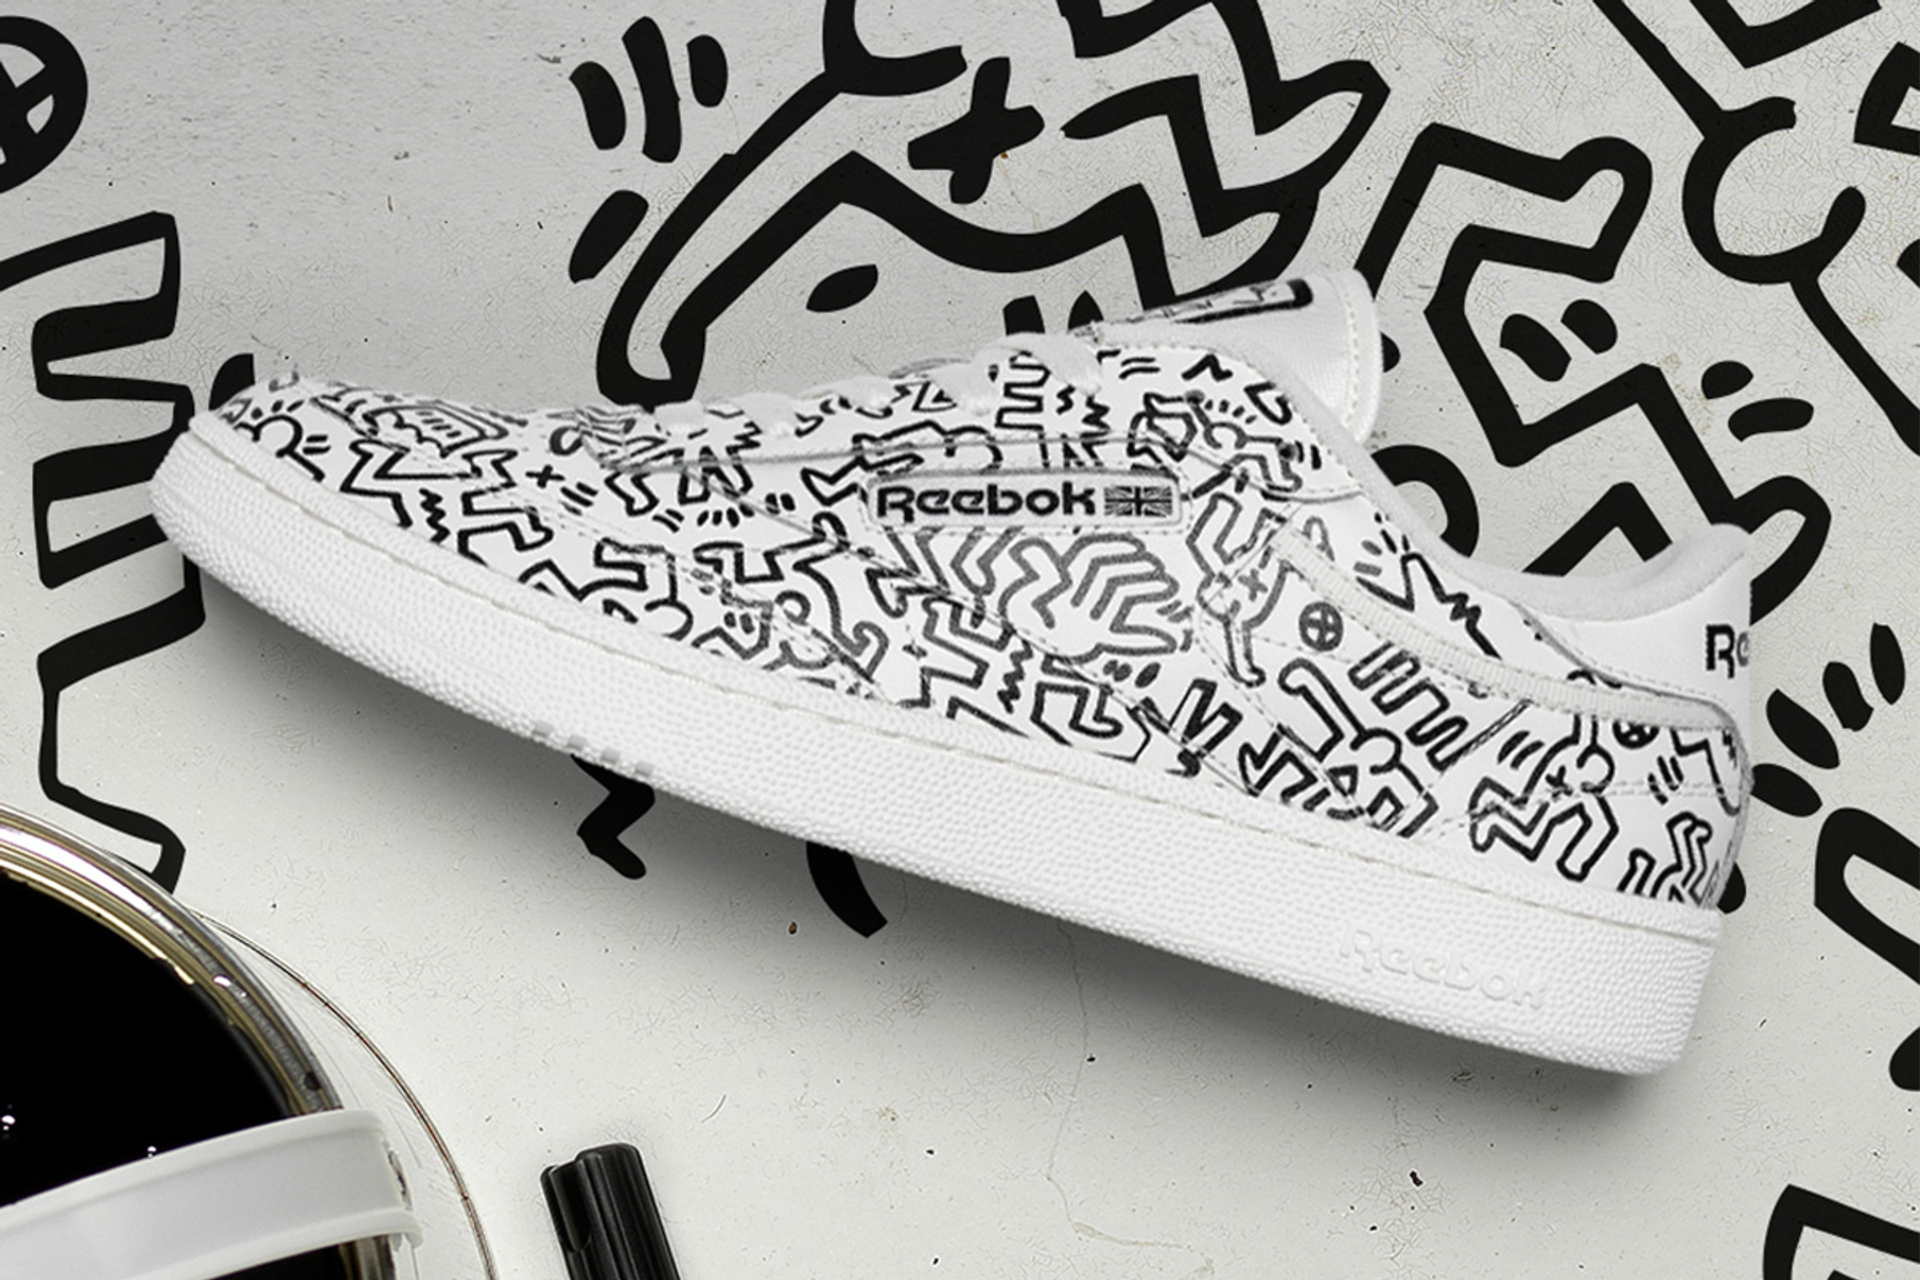 An image of a white sneaker by Reebok, fully decorated with Keith Haring's dancing figures.